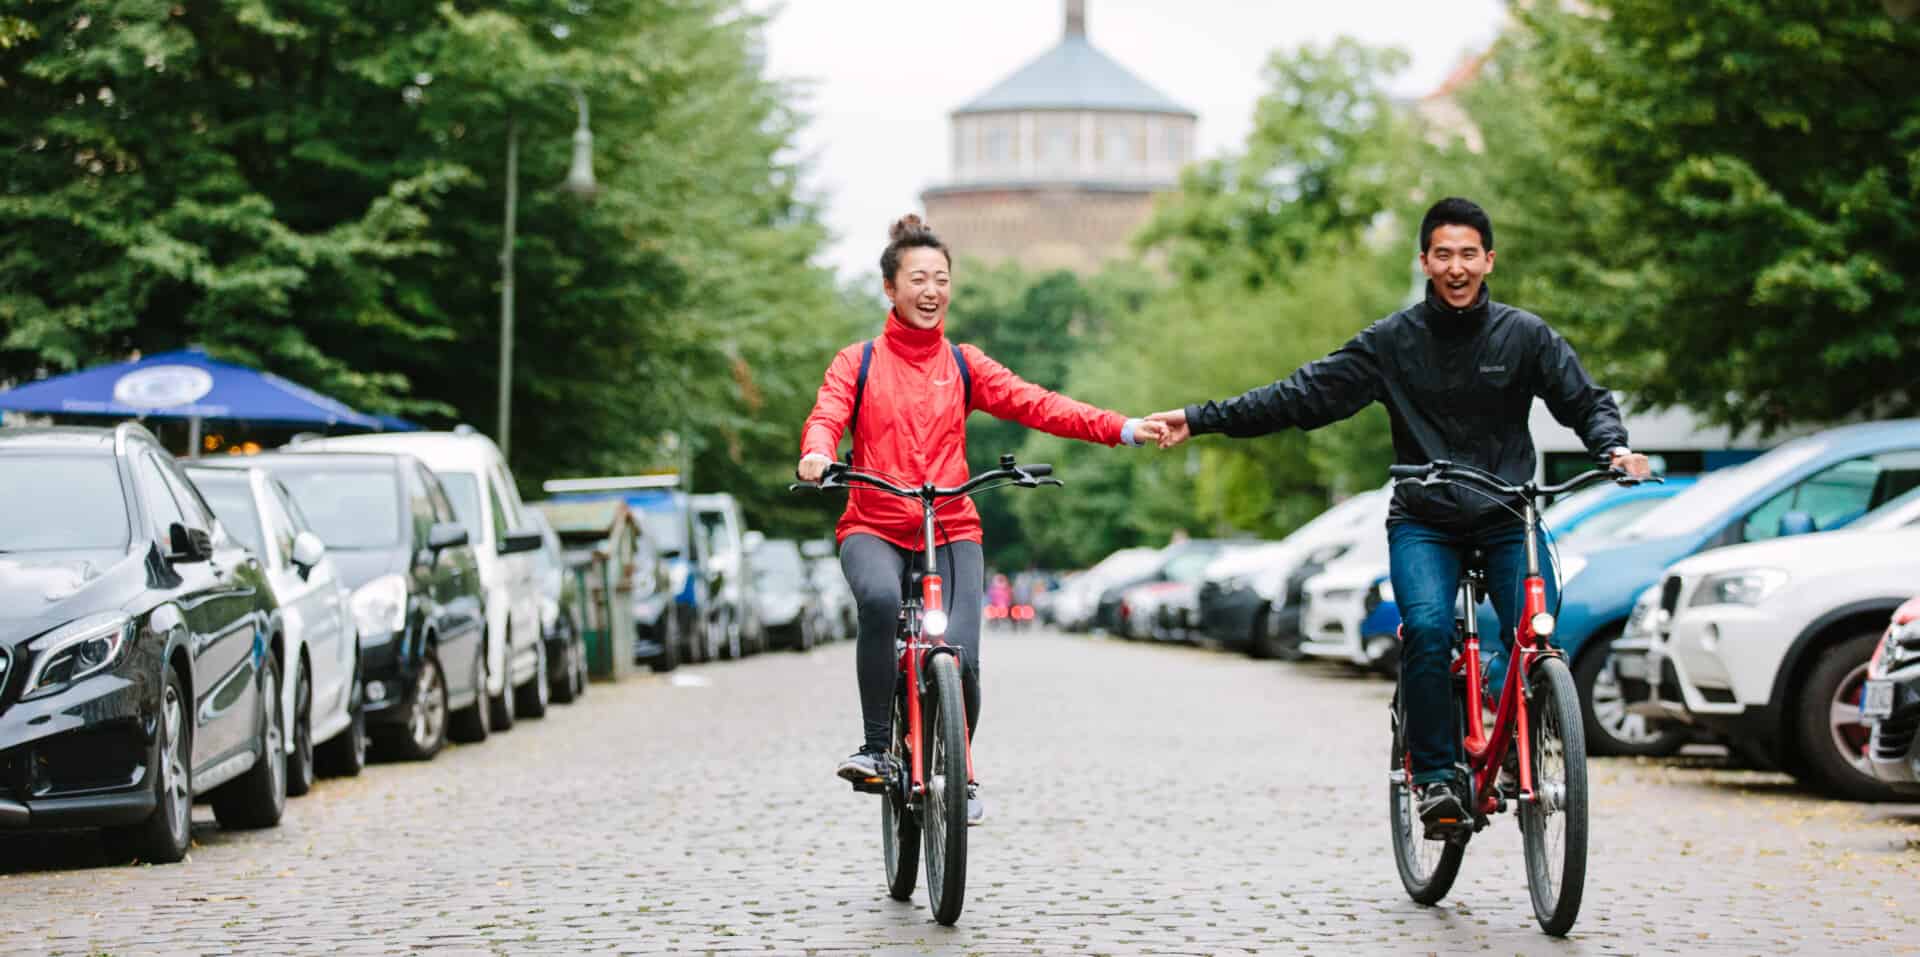 A couple holds hands while riding through Prenzlauer Berg, Berlin, Germany